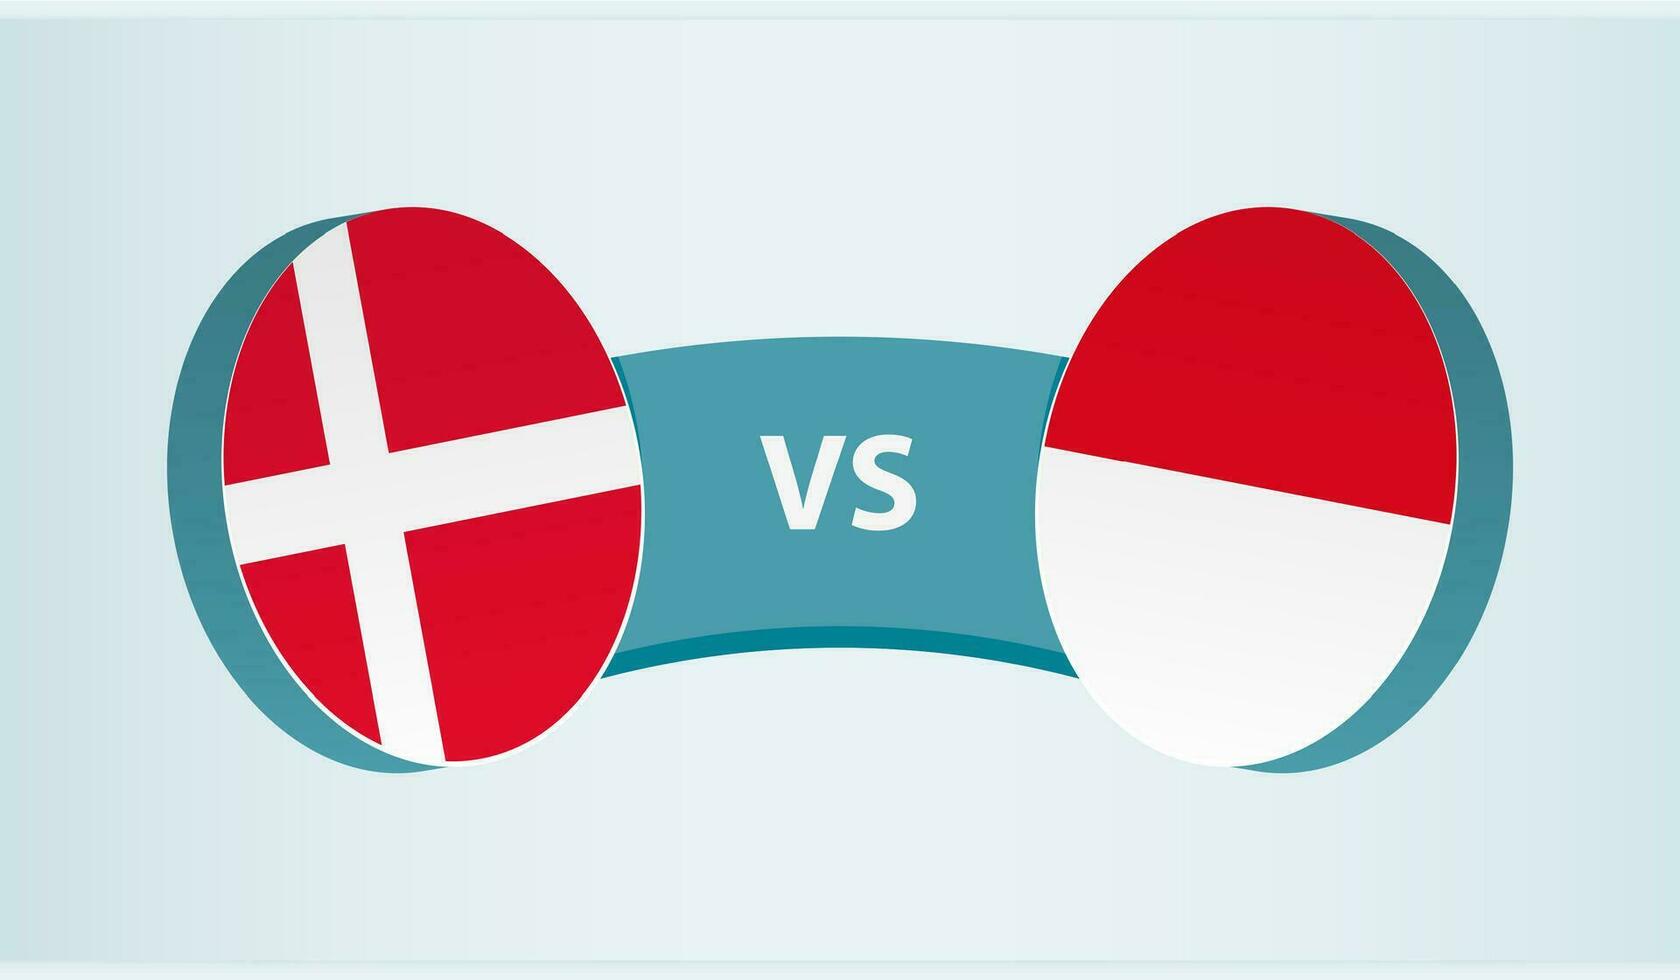 Denmark versus Indonesia, team sports competition concept. vector